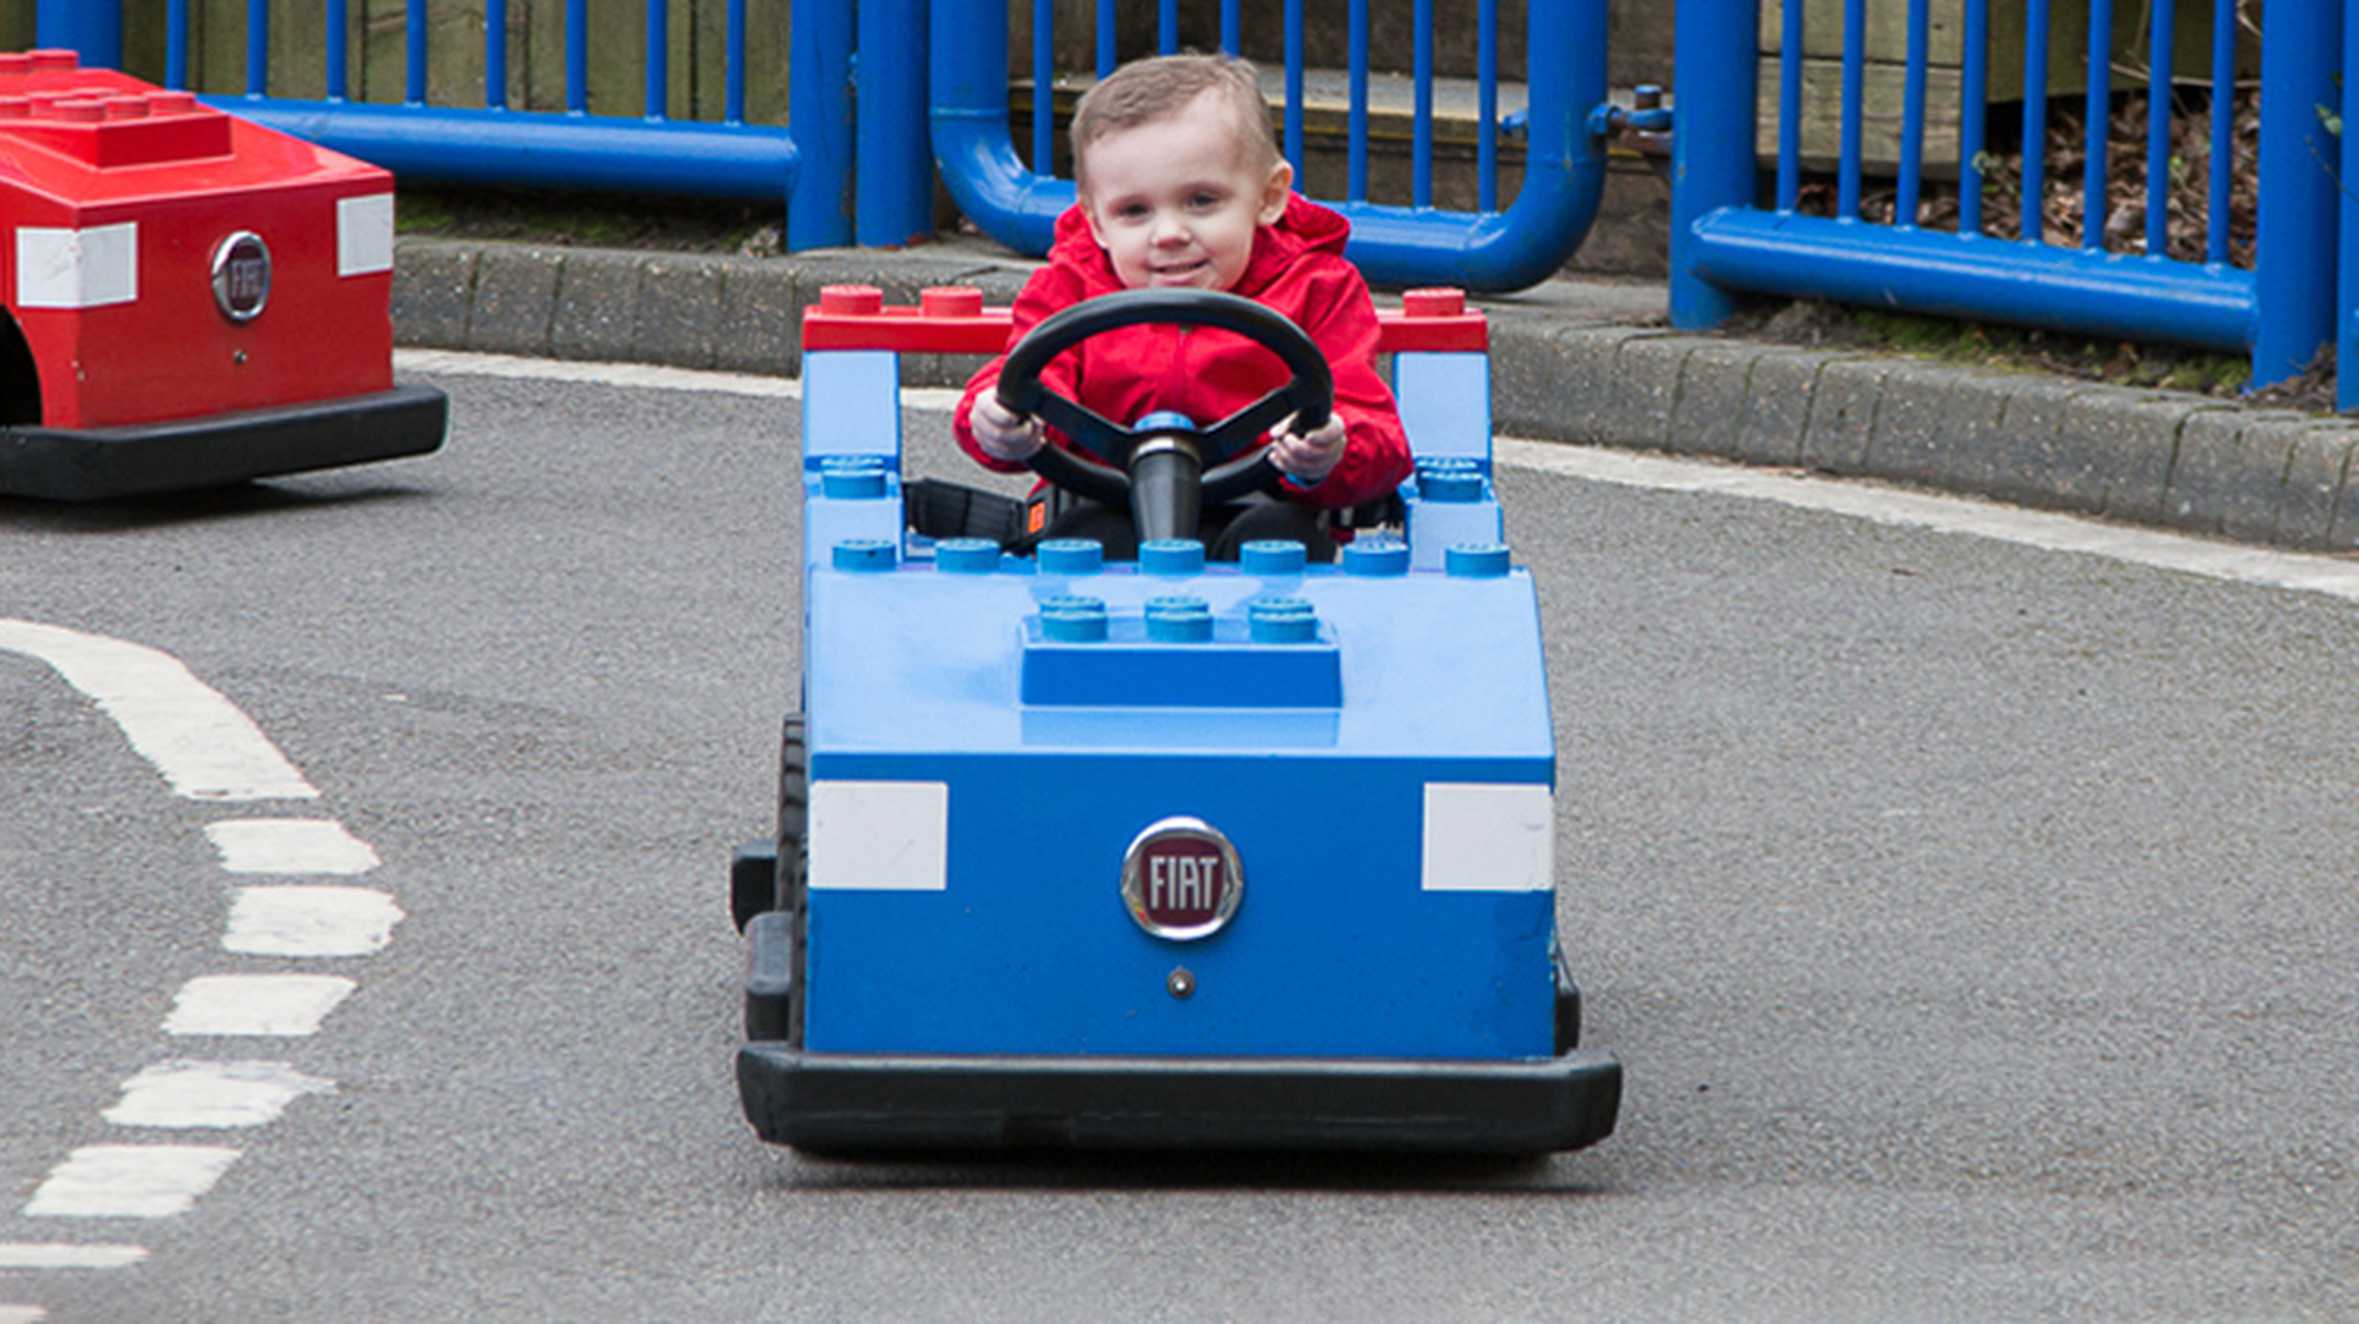 Zak driving a blue Lego go-kart, during his trip to Legoland.